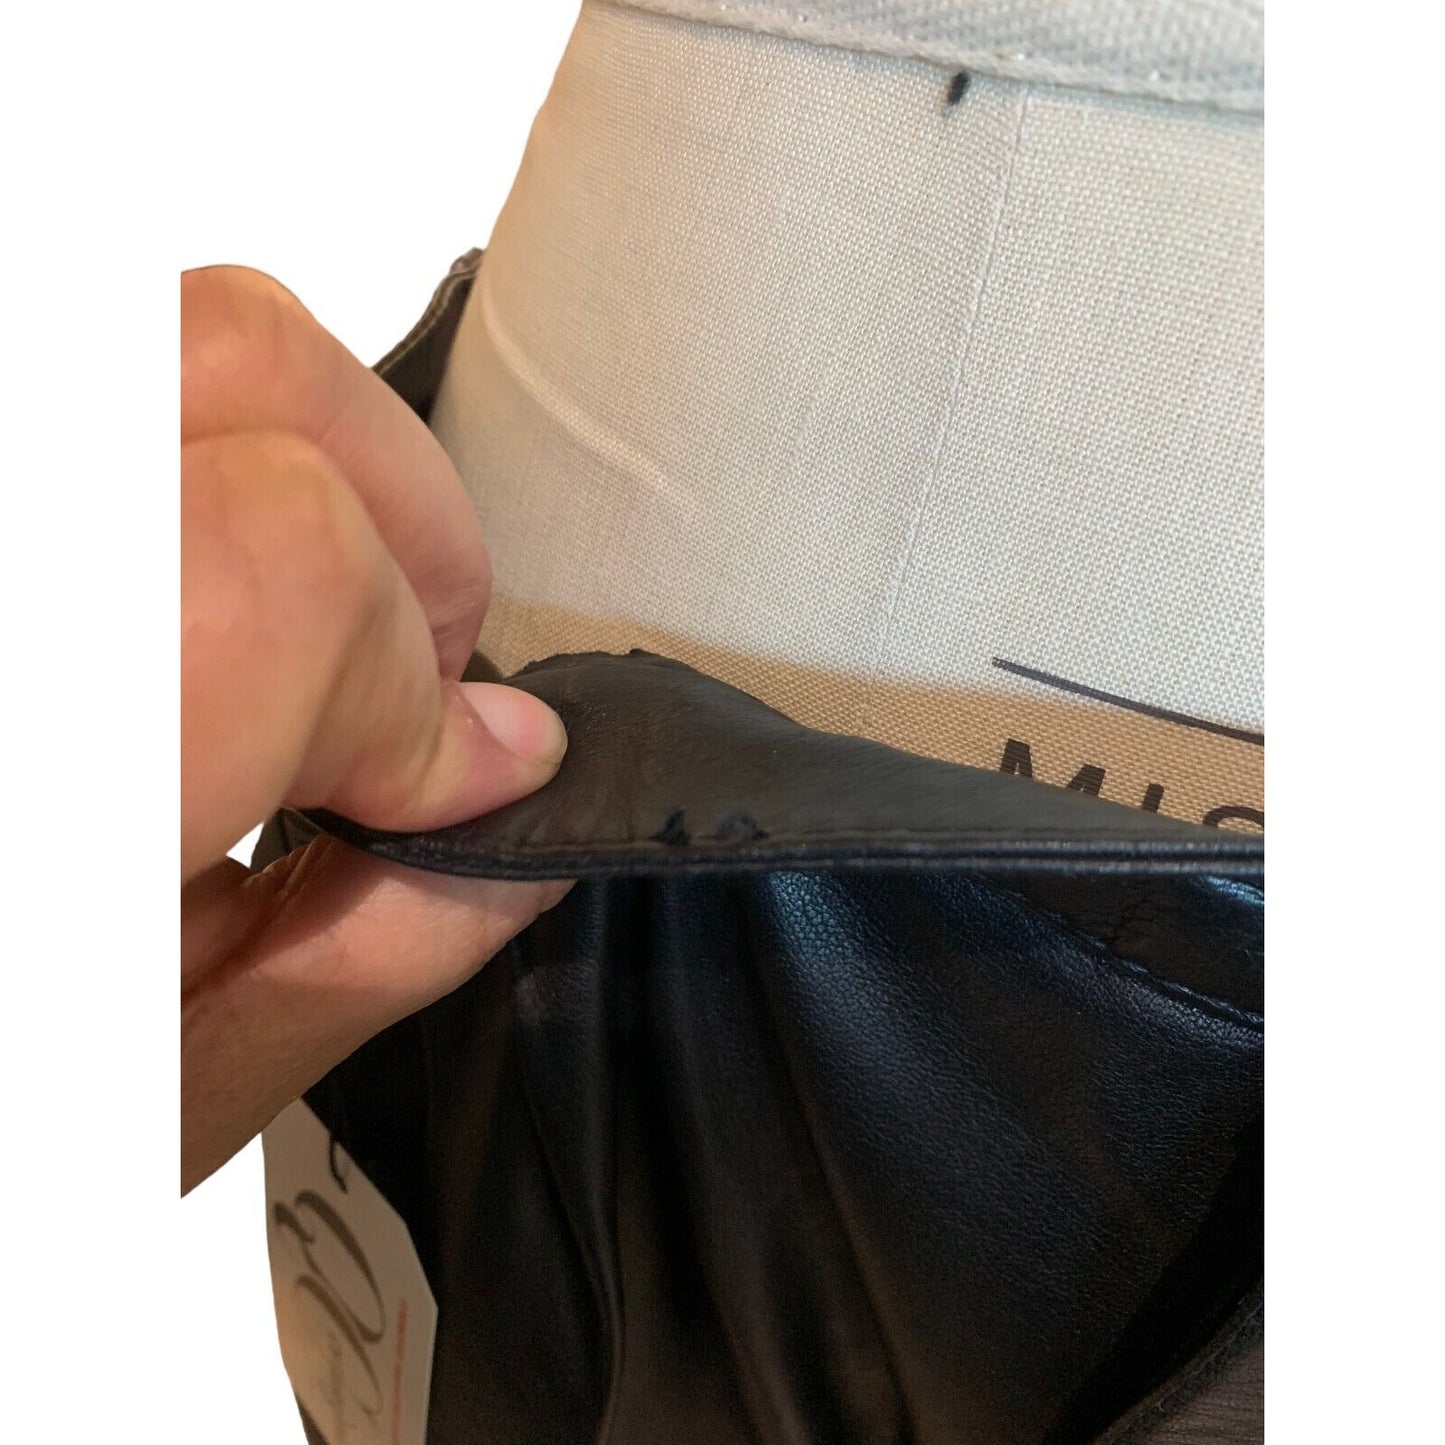 Inside View Of Waistband